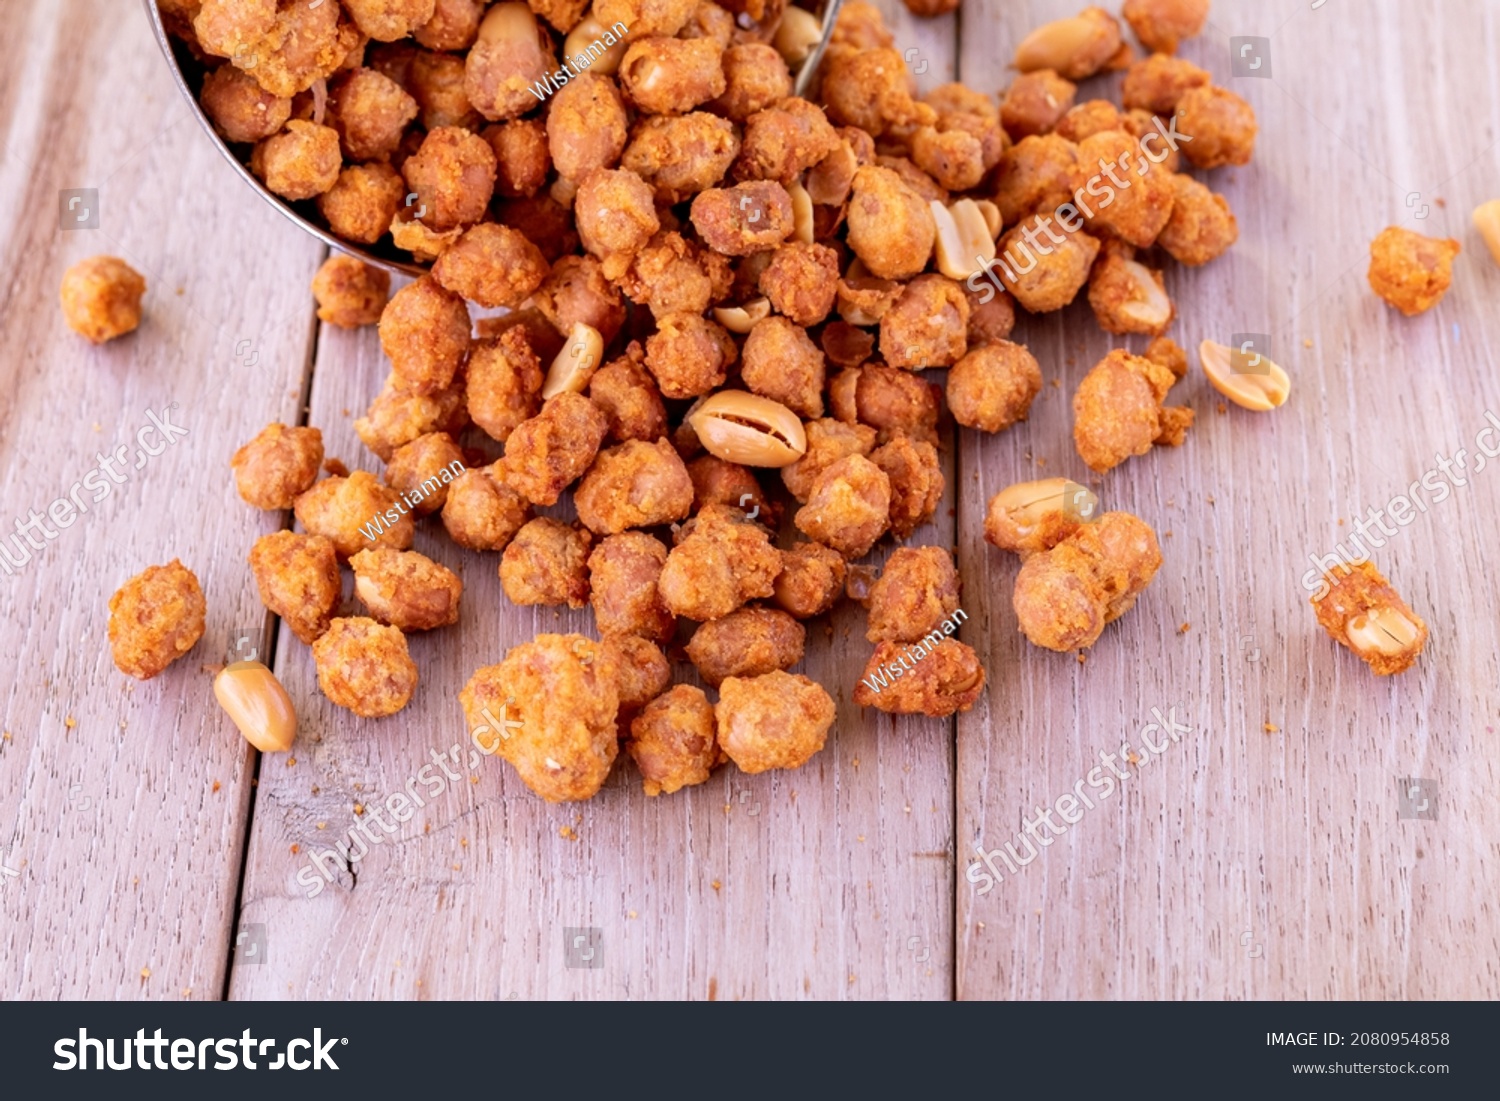 peanuts wrapped in flour, eggs and spices, which are fried, have a textured shape, with a crunchy, crunchy and savory taste.
usually called "egg nuts, Kacang telur" or "spice beans-kacang rempah" #2080954858